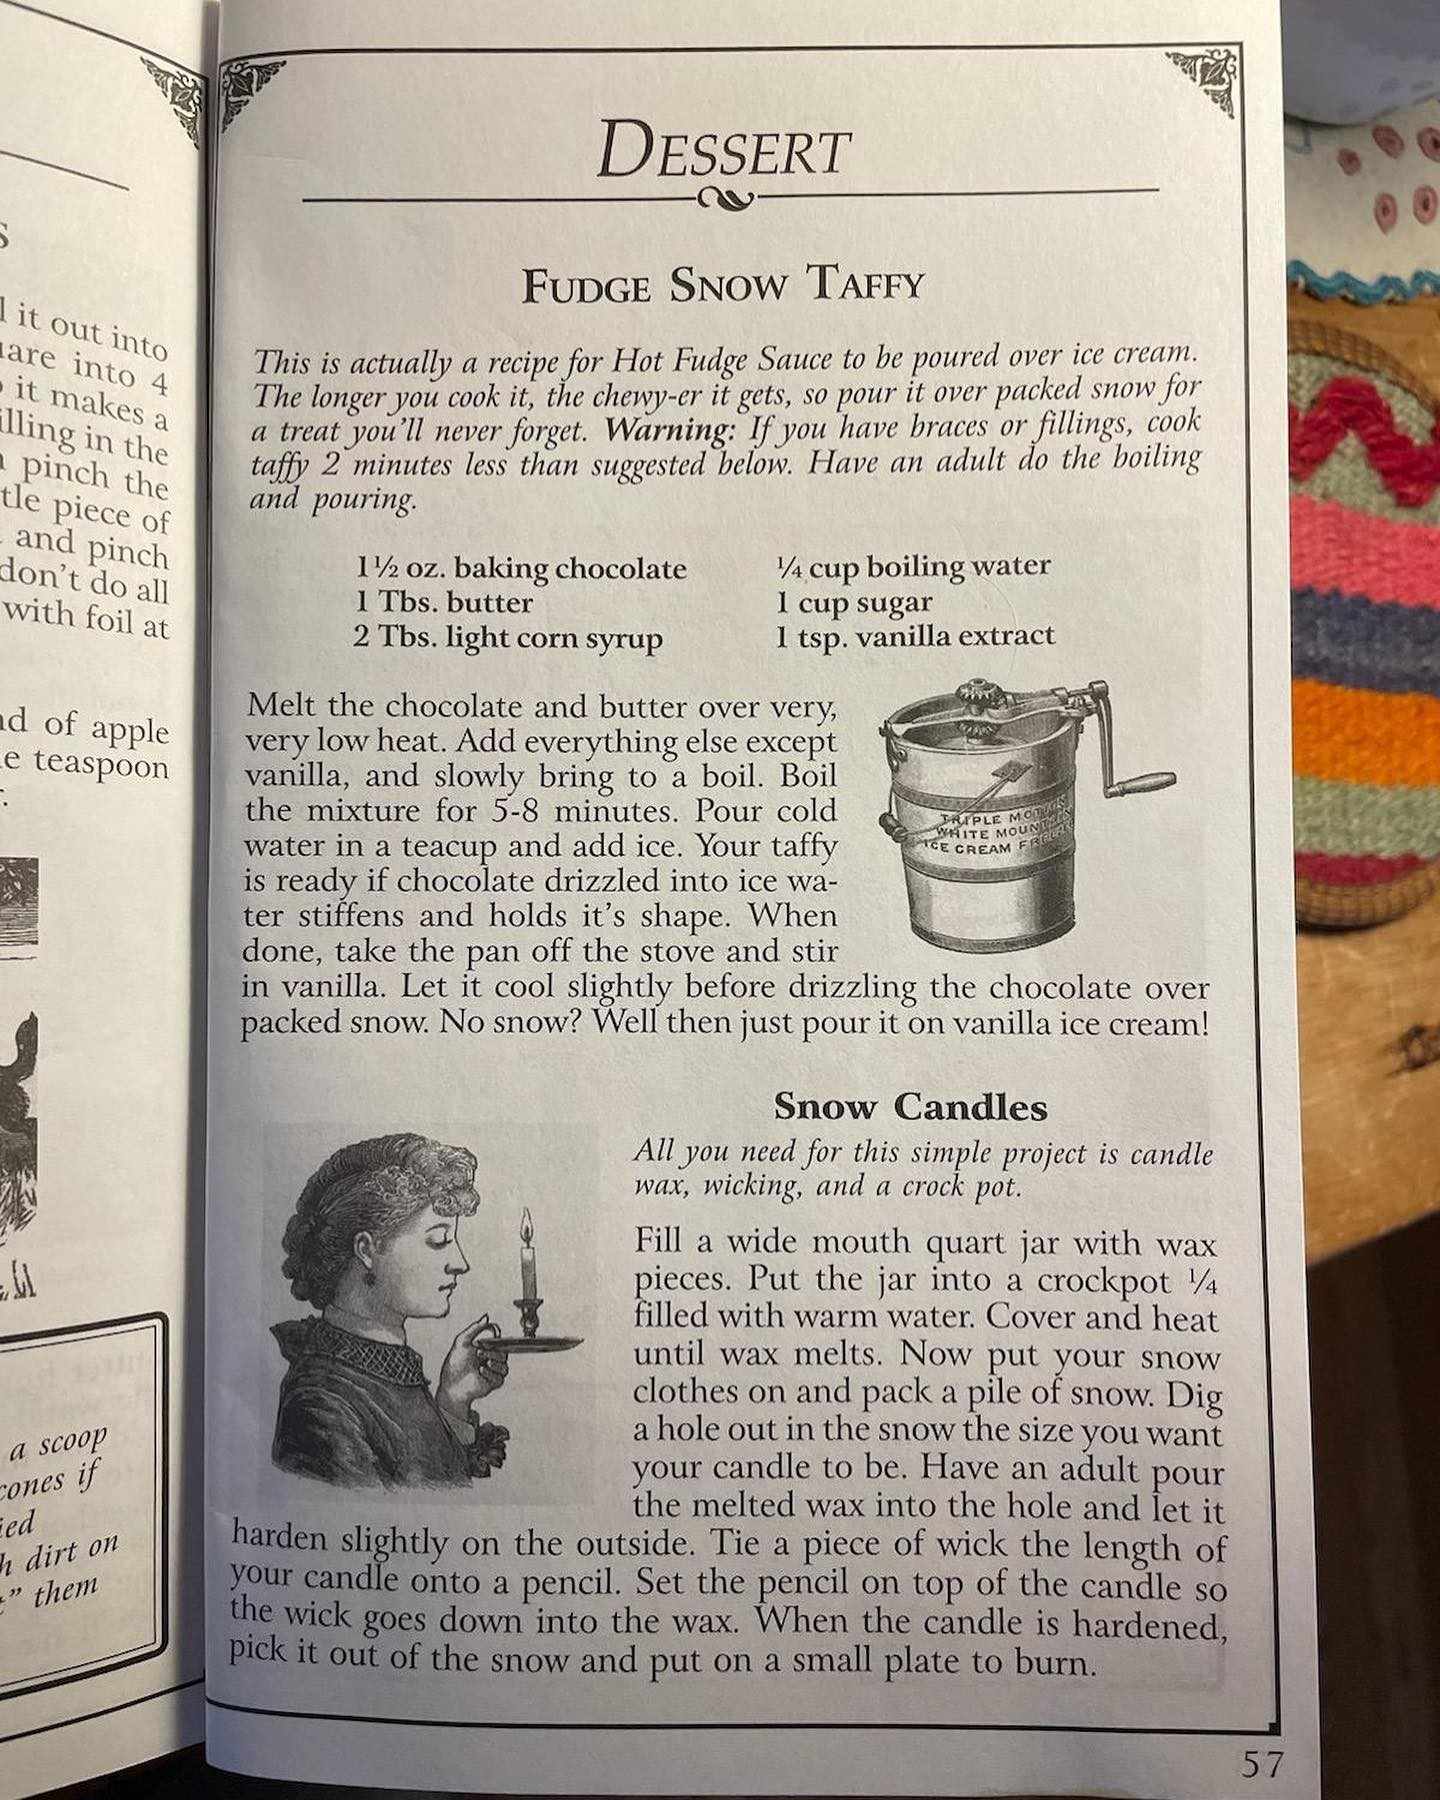 Are you snowed in like we are? There's all kinds of fun snow recipes out there, including this one for fudge snow taffy which you can find in our book "Children at the Hearth," available as a paperback or e-book at the link in our bio. 

#linkinbio #828isgreat #logcabincooking #childrenatthehearth #snowday #snow #winterweather #ashevillenc #asheville #northcarolina #snowtaffy #snowfudge #fudgesauce #oldtimey #familyfun #snowactivity #snowfun